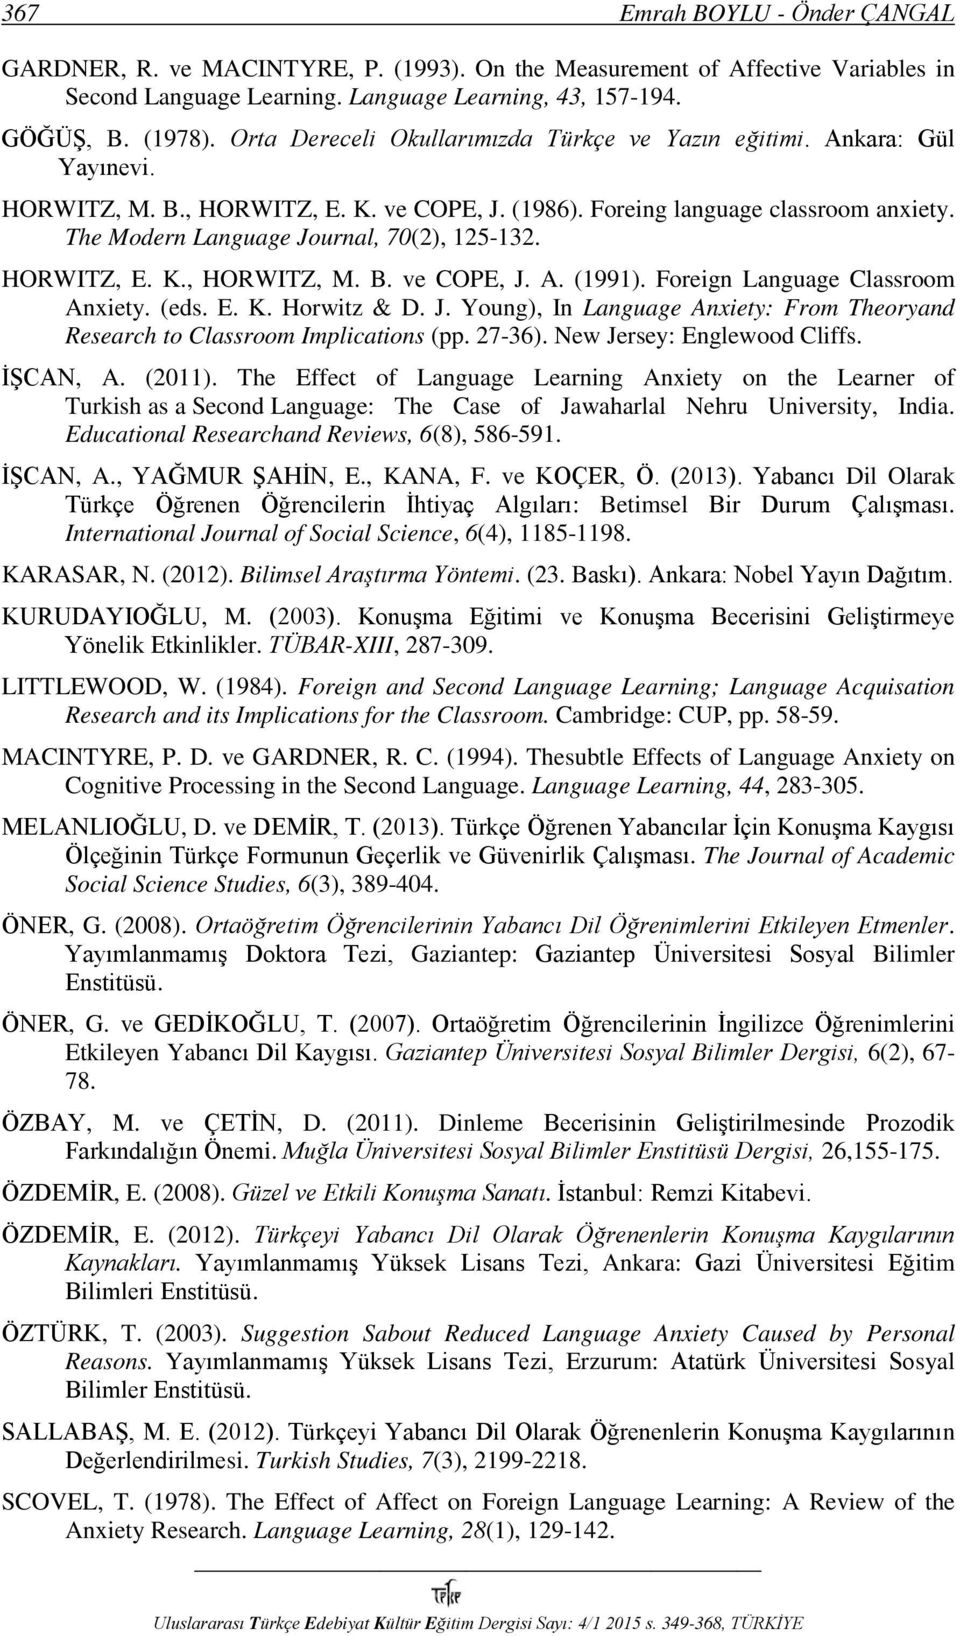 The Modern Language Journal, 70(2), 125-132. HORWITZ, E. K., HORWITZ, M. B. ve COPE, J. A. (1991). Foreign Language Classroom Anxiety. (eds. E. K. Horwitz & D. J. Young), In Language Anxiety: From Theoryand Research to Classroom Implications (pp.